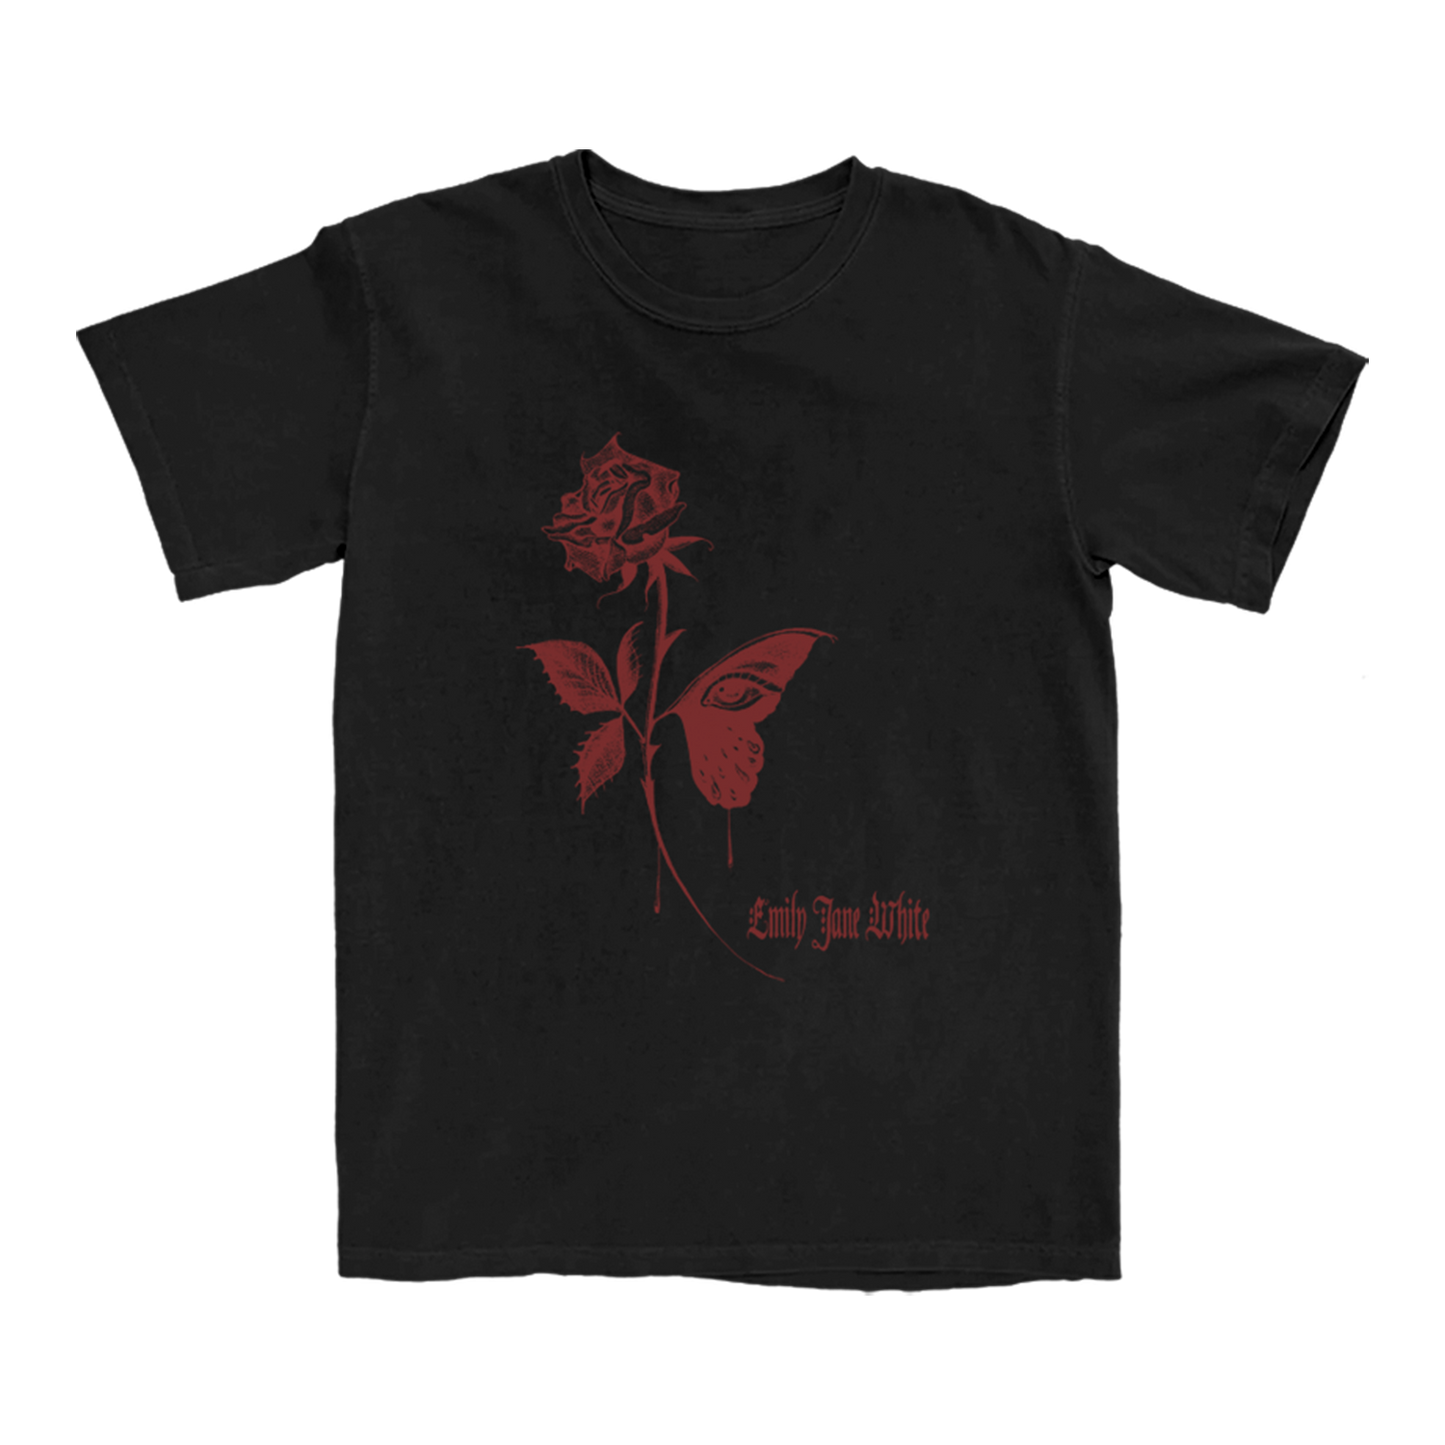 Unisex Black and Red Butterfly Rose Tee